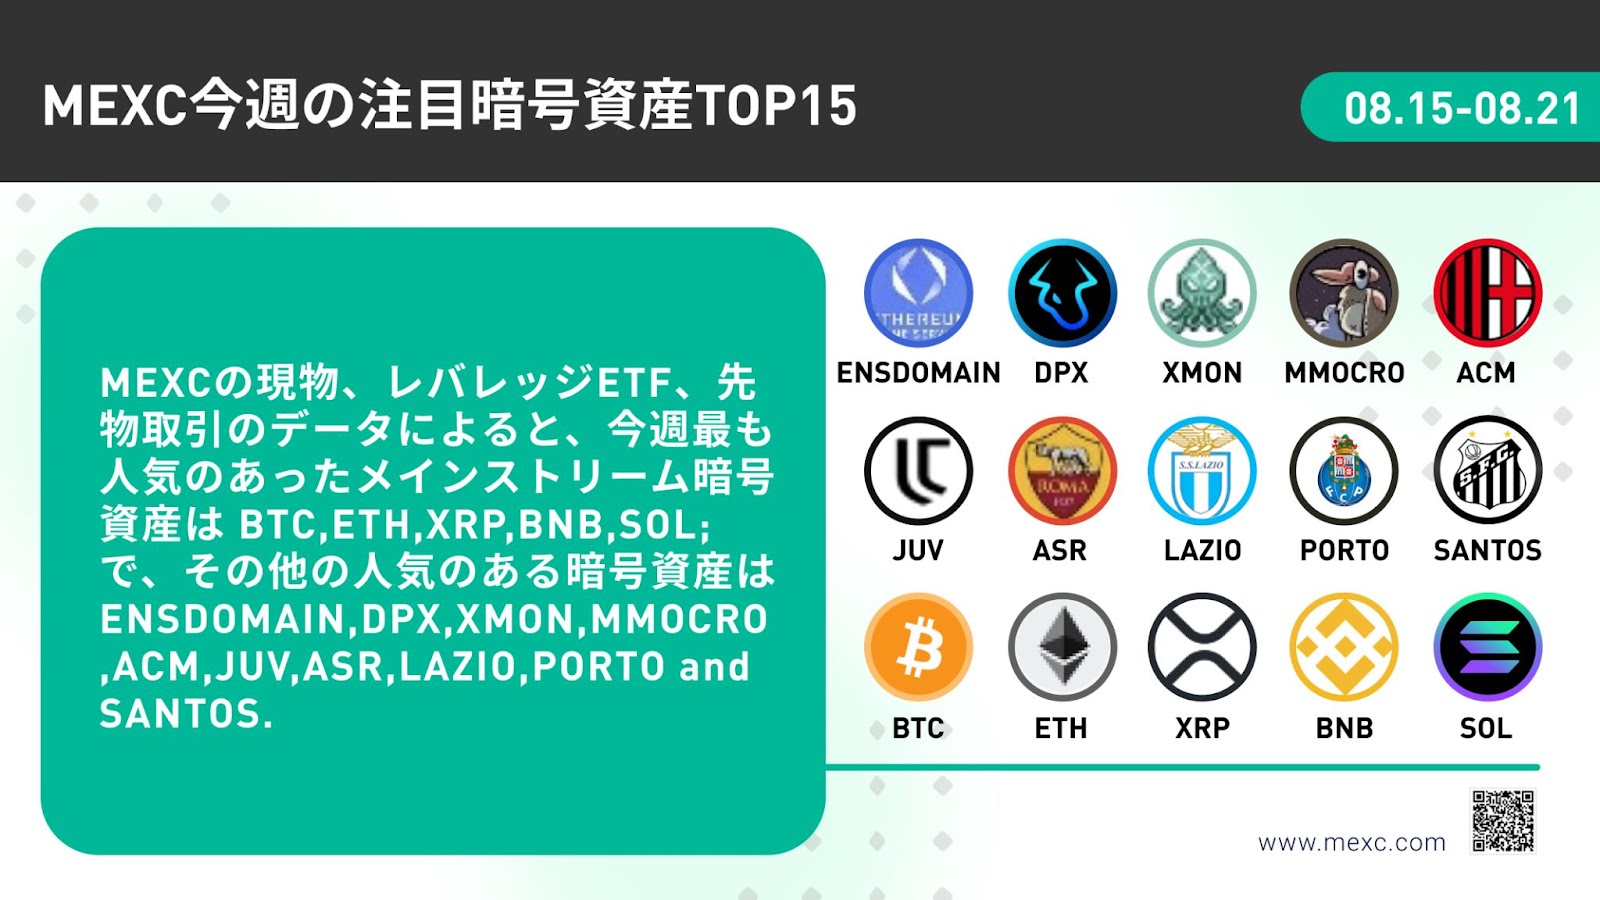 <strong>【8/15 – 8/21】過去7日間のMEXC注目銘柄TOP10</strong>